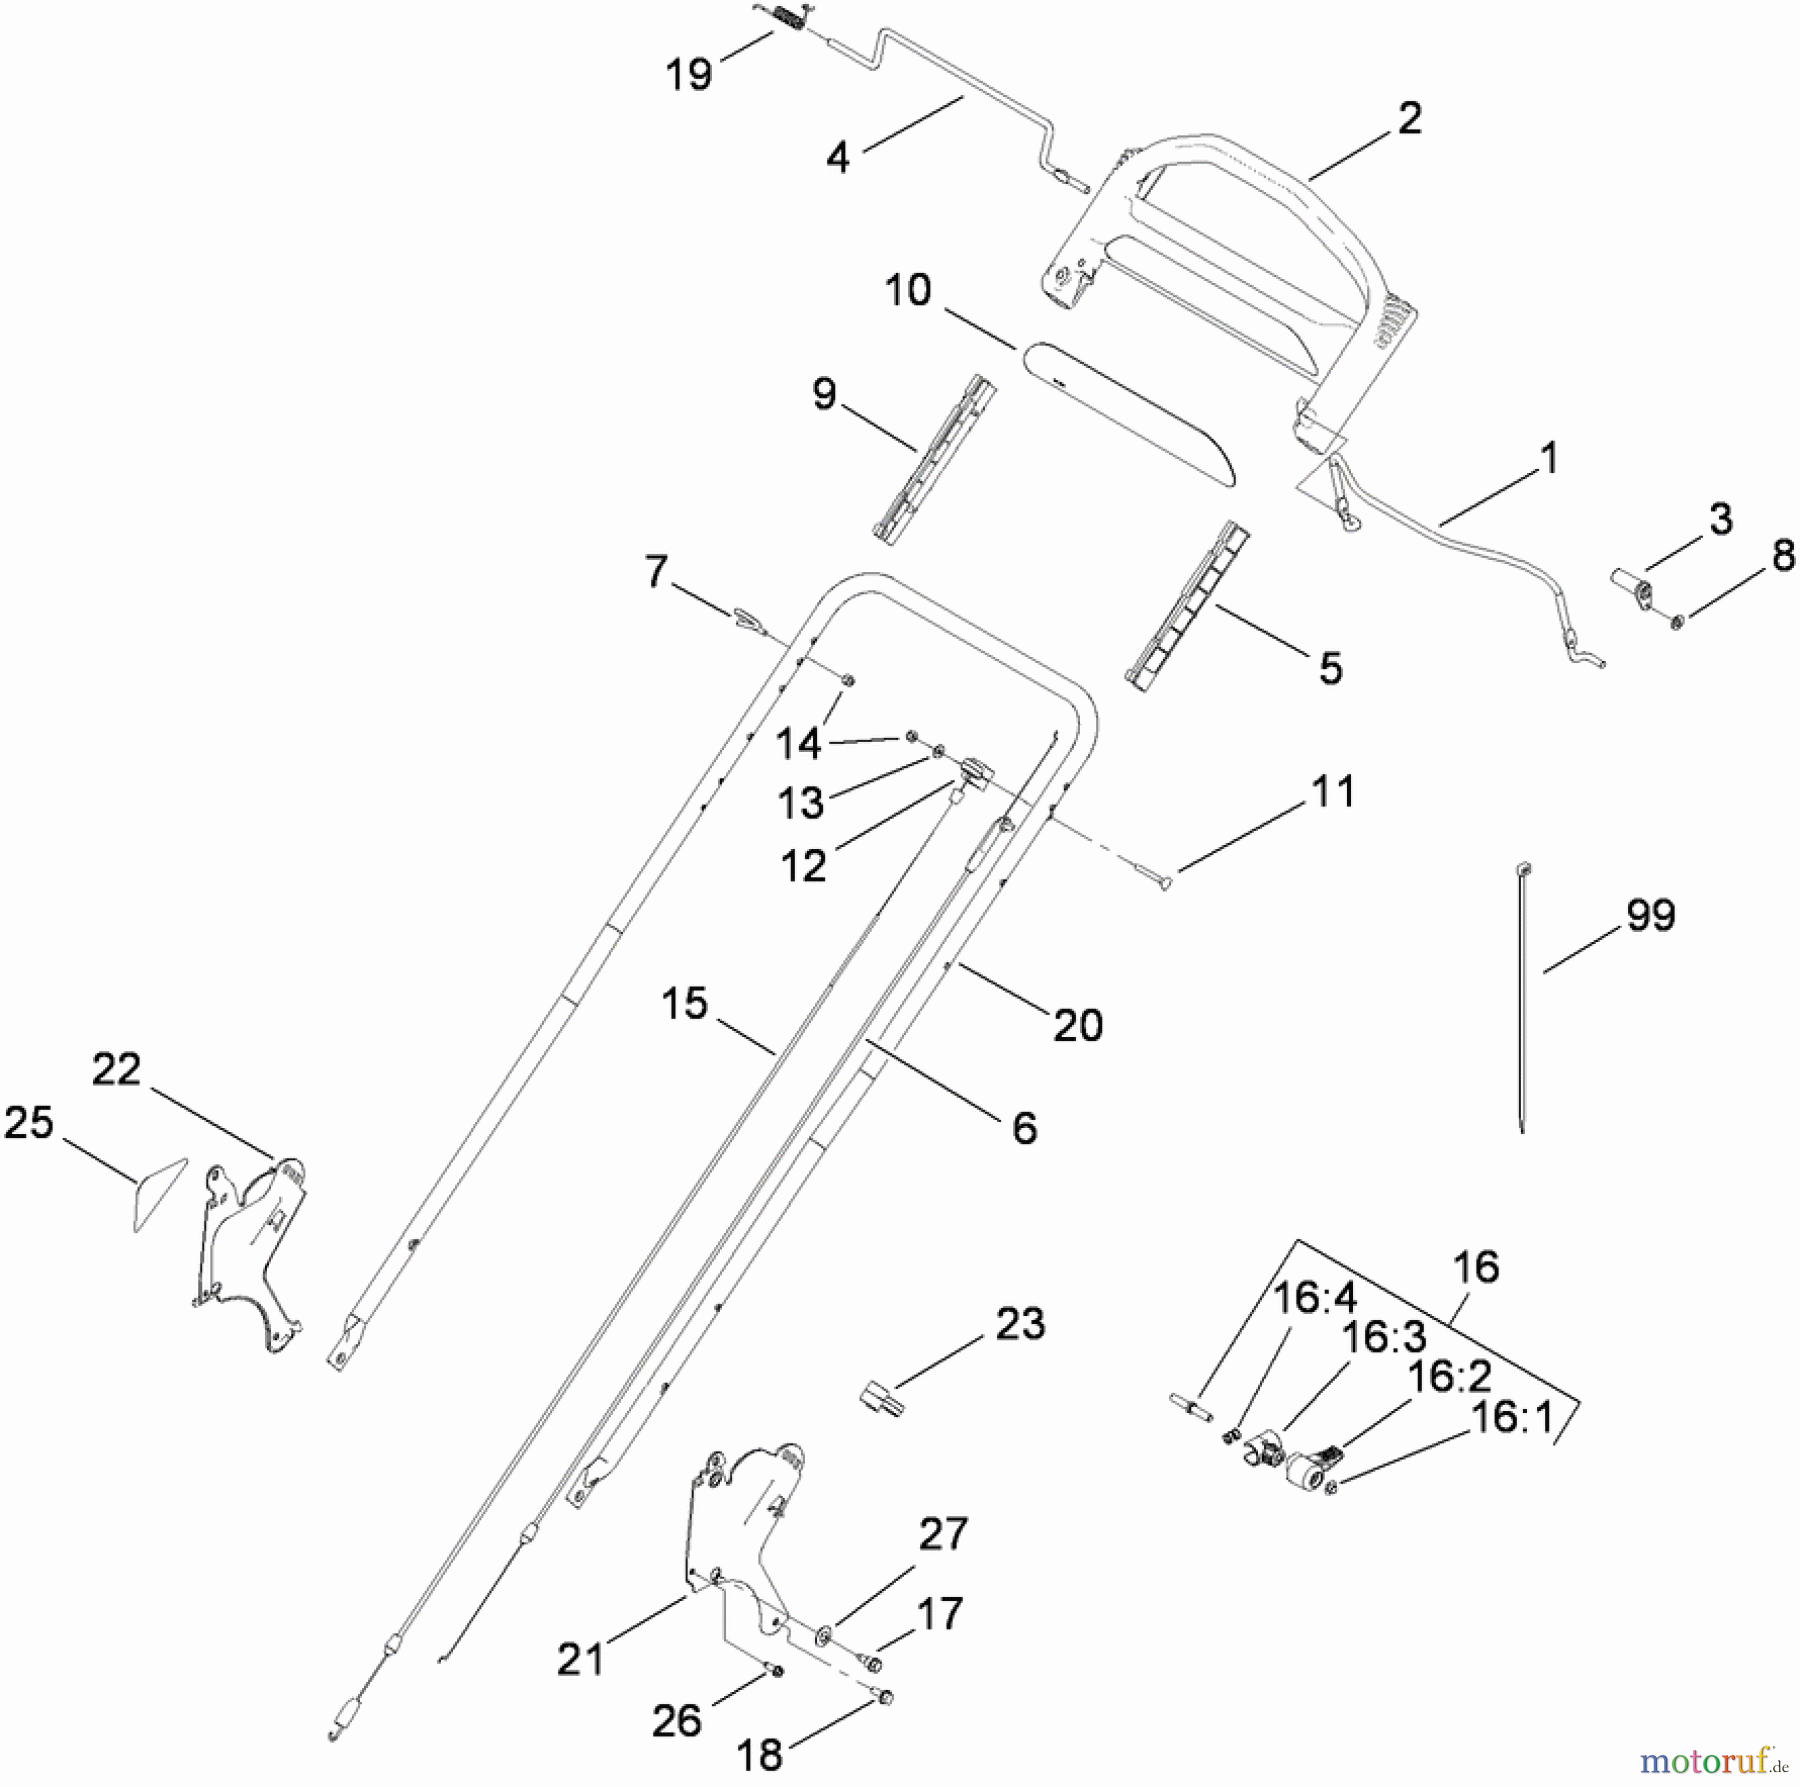  Toro Neu Mowers, Walk-Behind Seite 1 20099 - Toro Super Recycler Lawn Mower, 2010 (310000001-310000309) HANDLE AND CONTROL ASSEMBLY